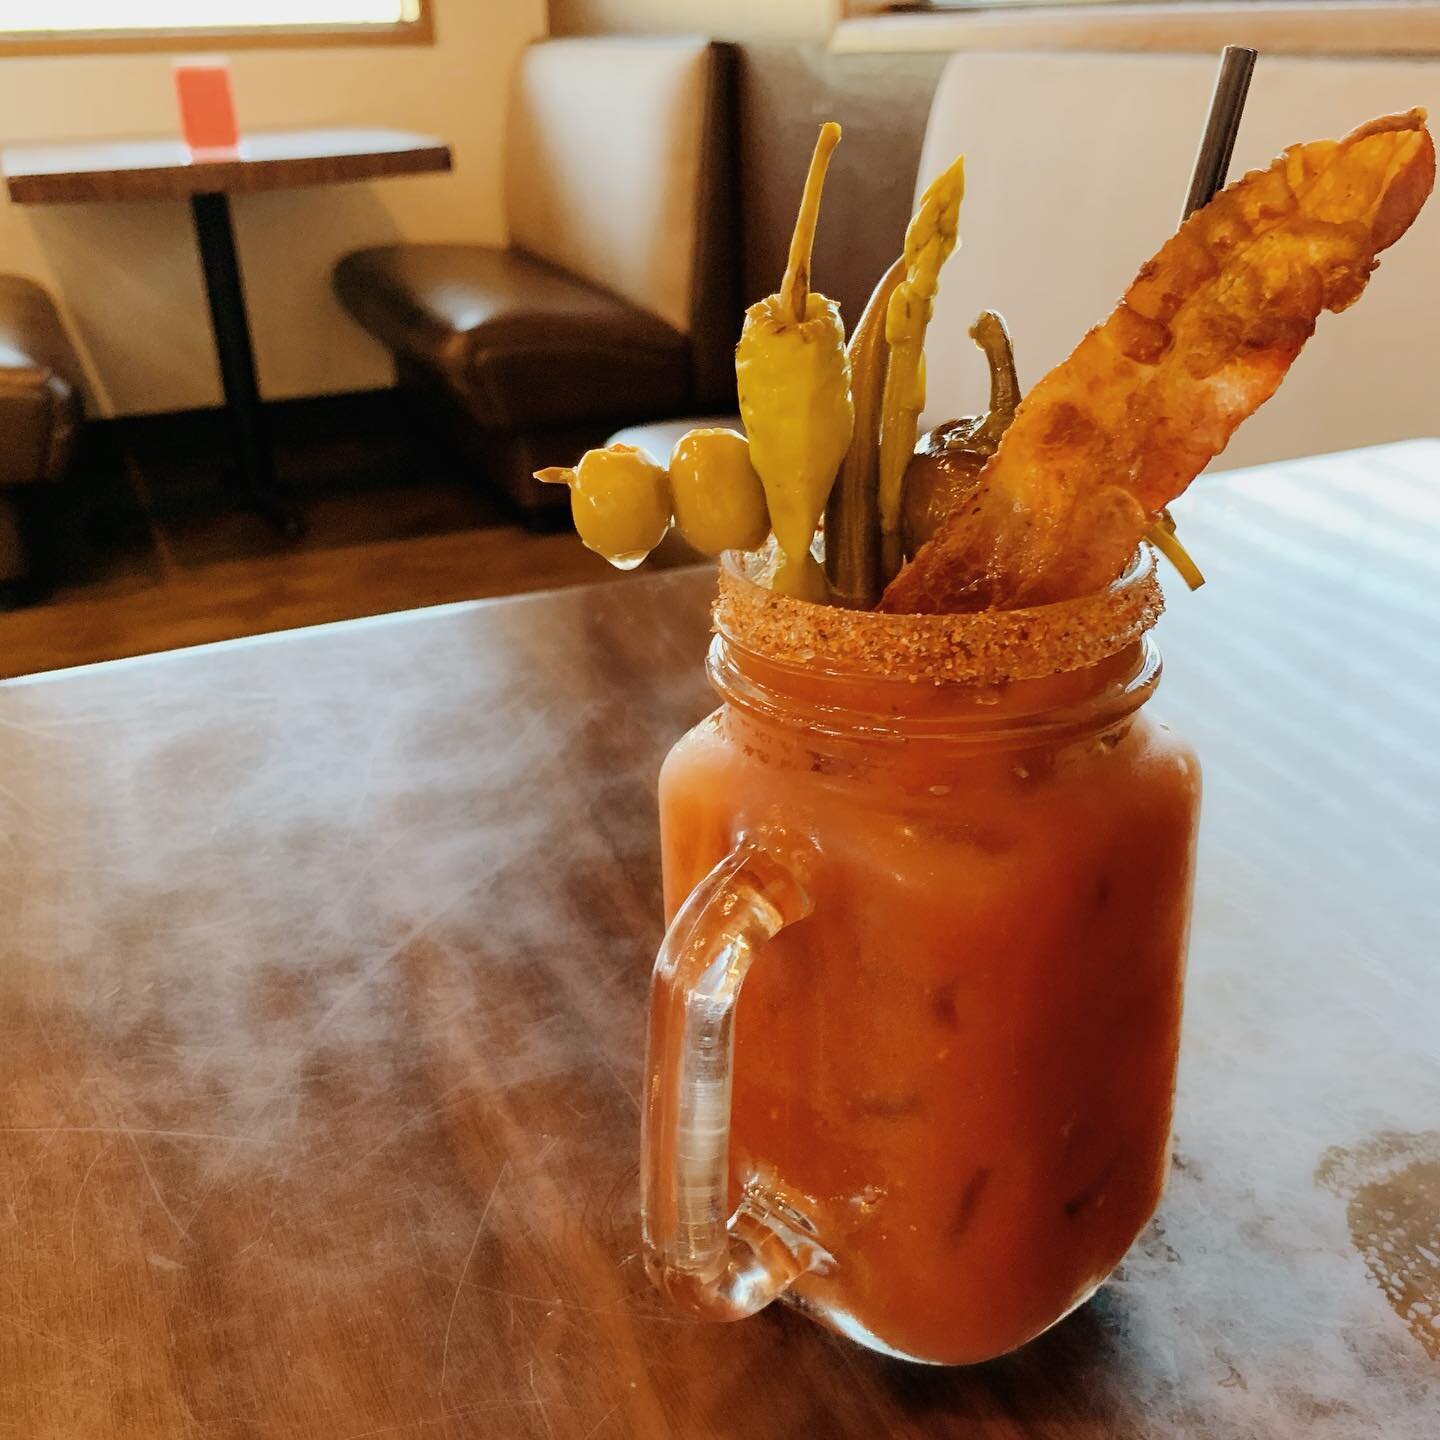 Come grab a Bloody Mary for your Sunday... you deserve it. 😉